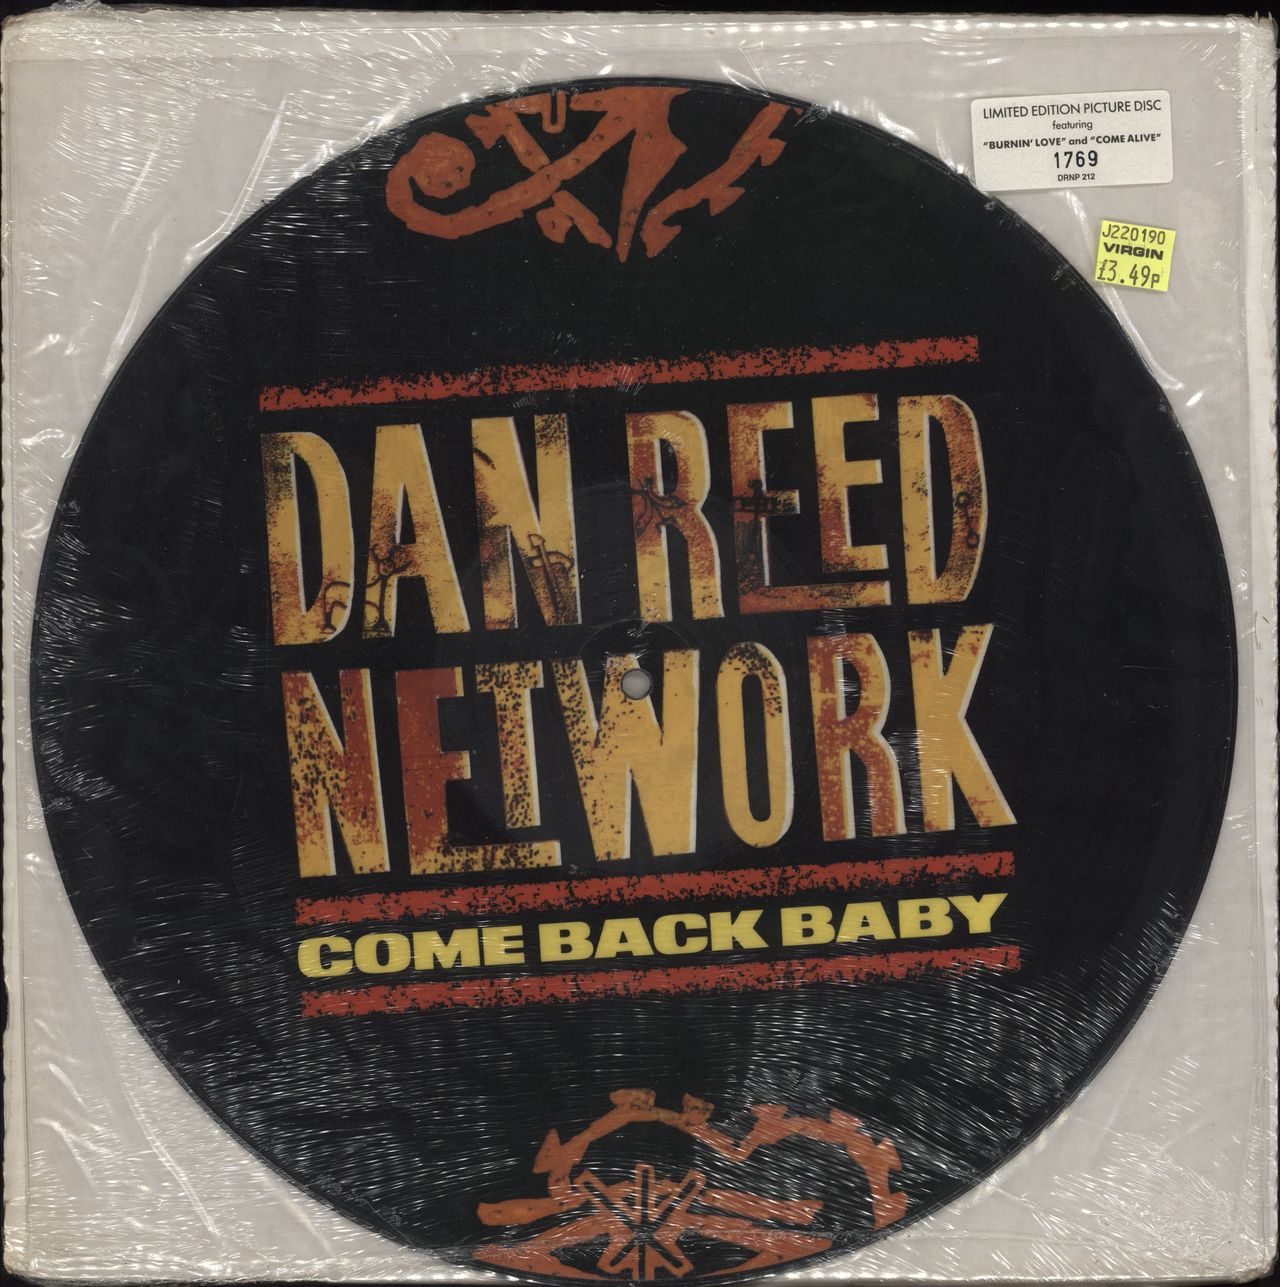 Dan Reed Network Come Back Baby - Sealed UK 12" vinyl picture disc (12 inch picture record) DRNP212